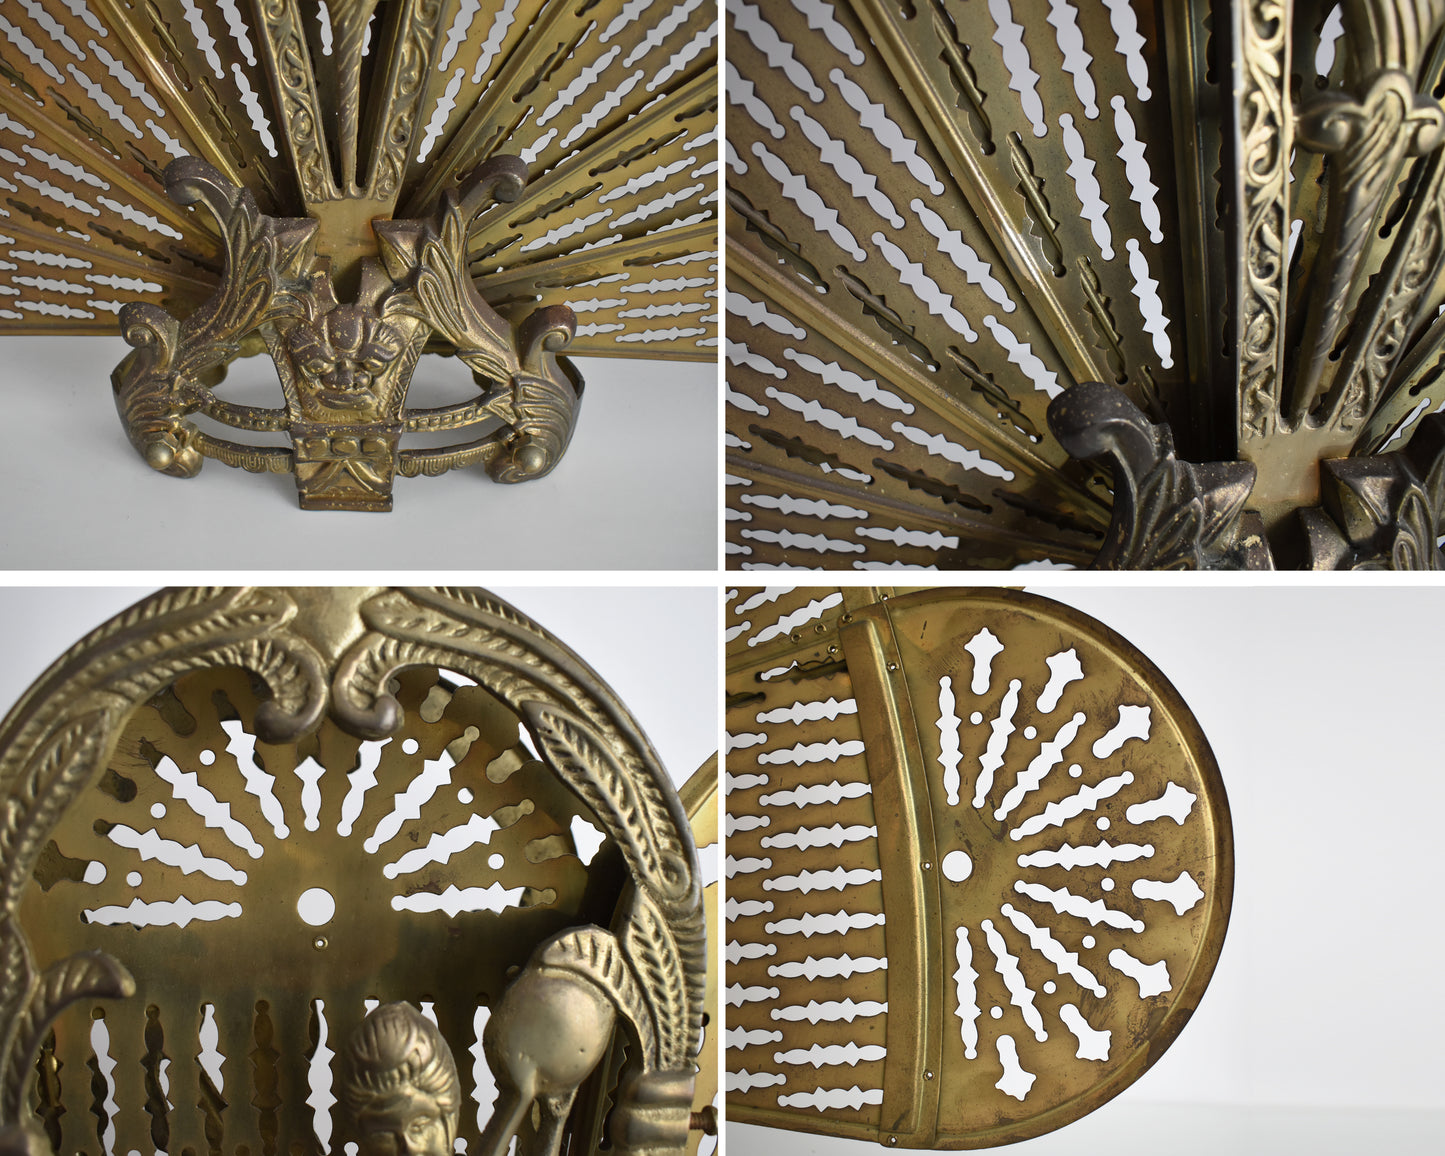 A photo collage of small flaws which shows patina and dark spots on the brass